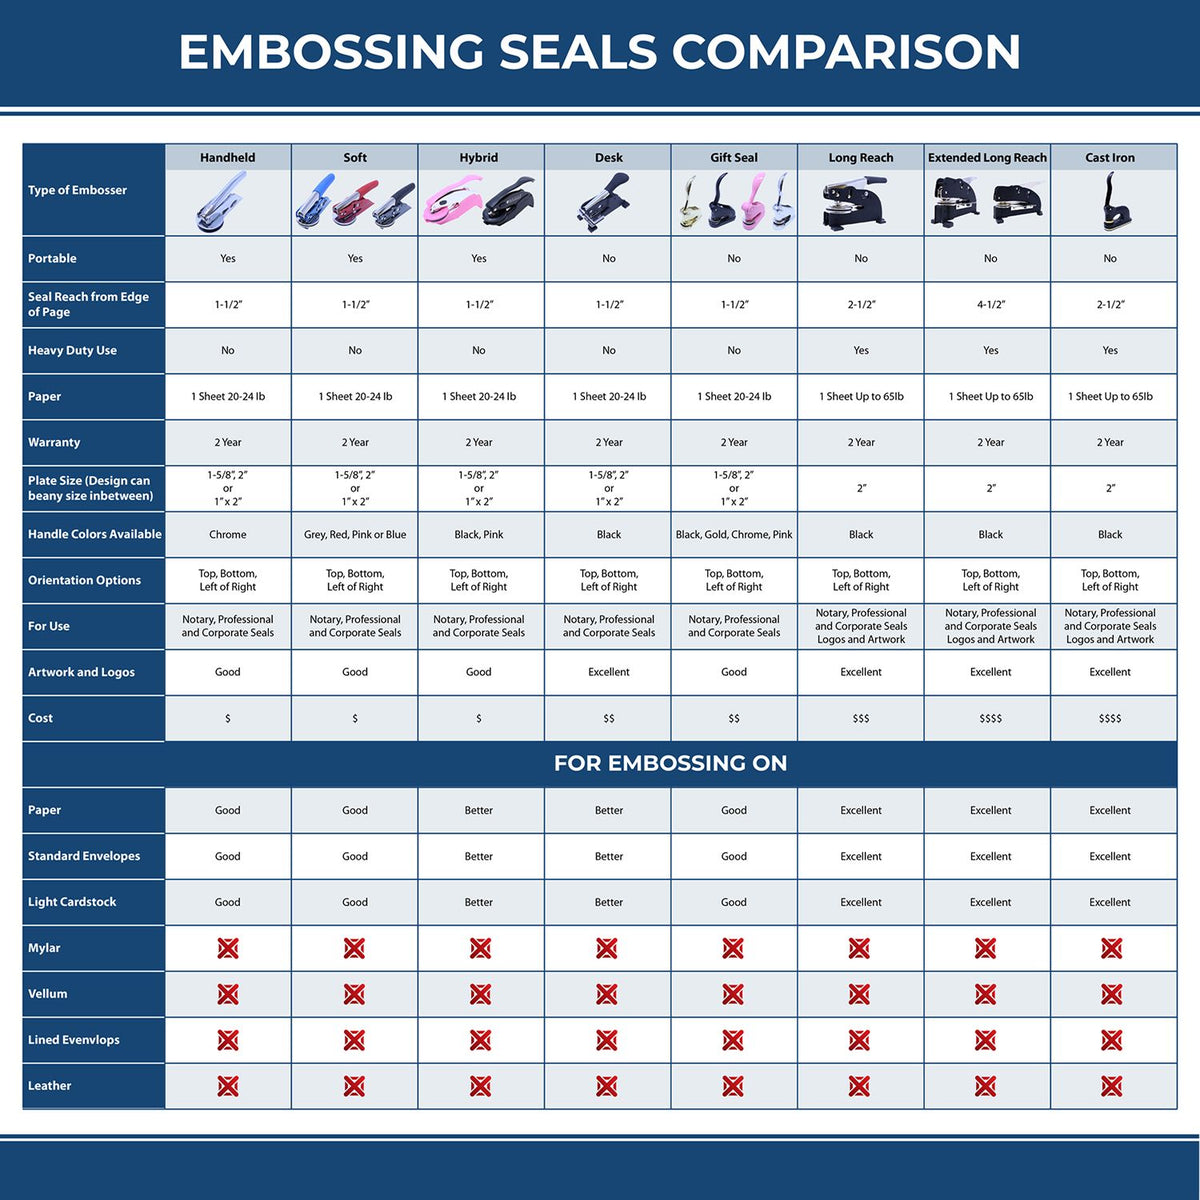 A comparison chart for the different types of mount models available for the State of North Carolina Extended Long Reach Engineer Seal.